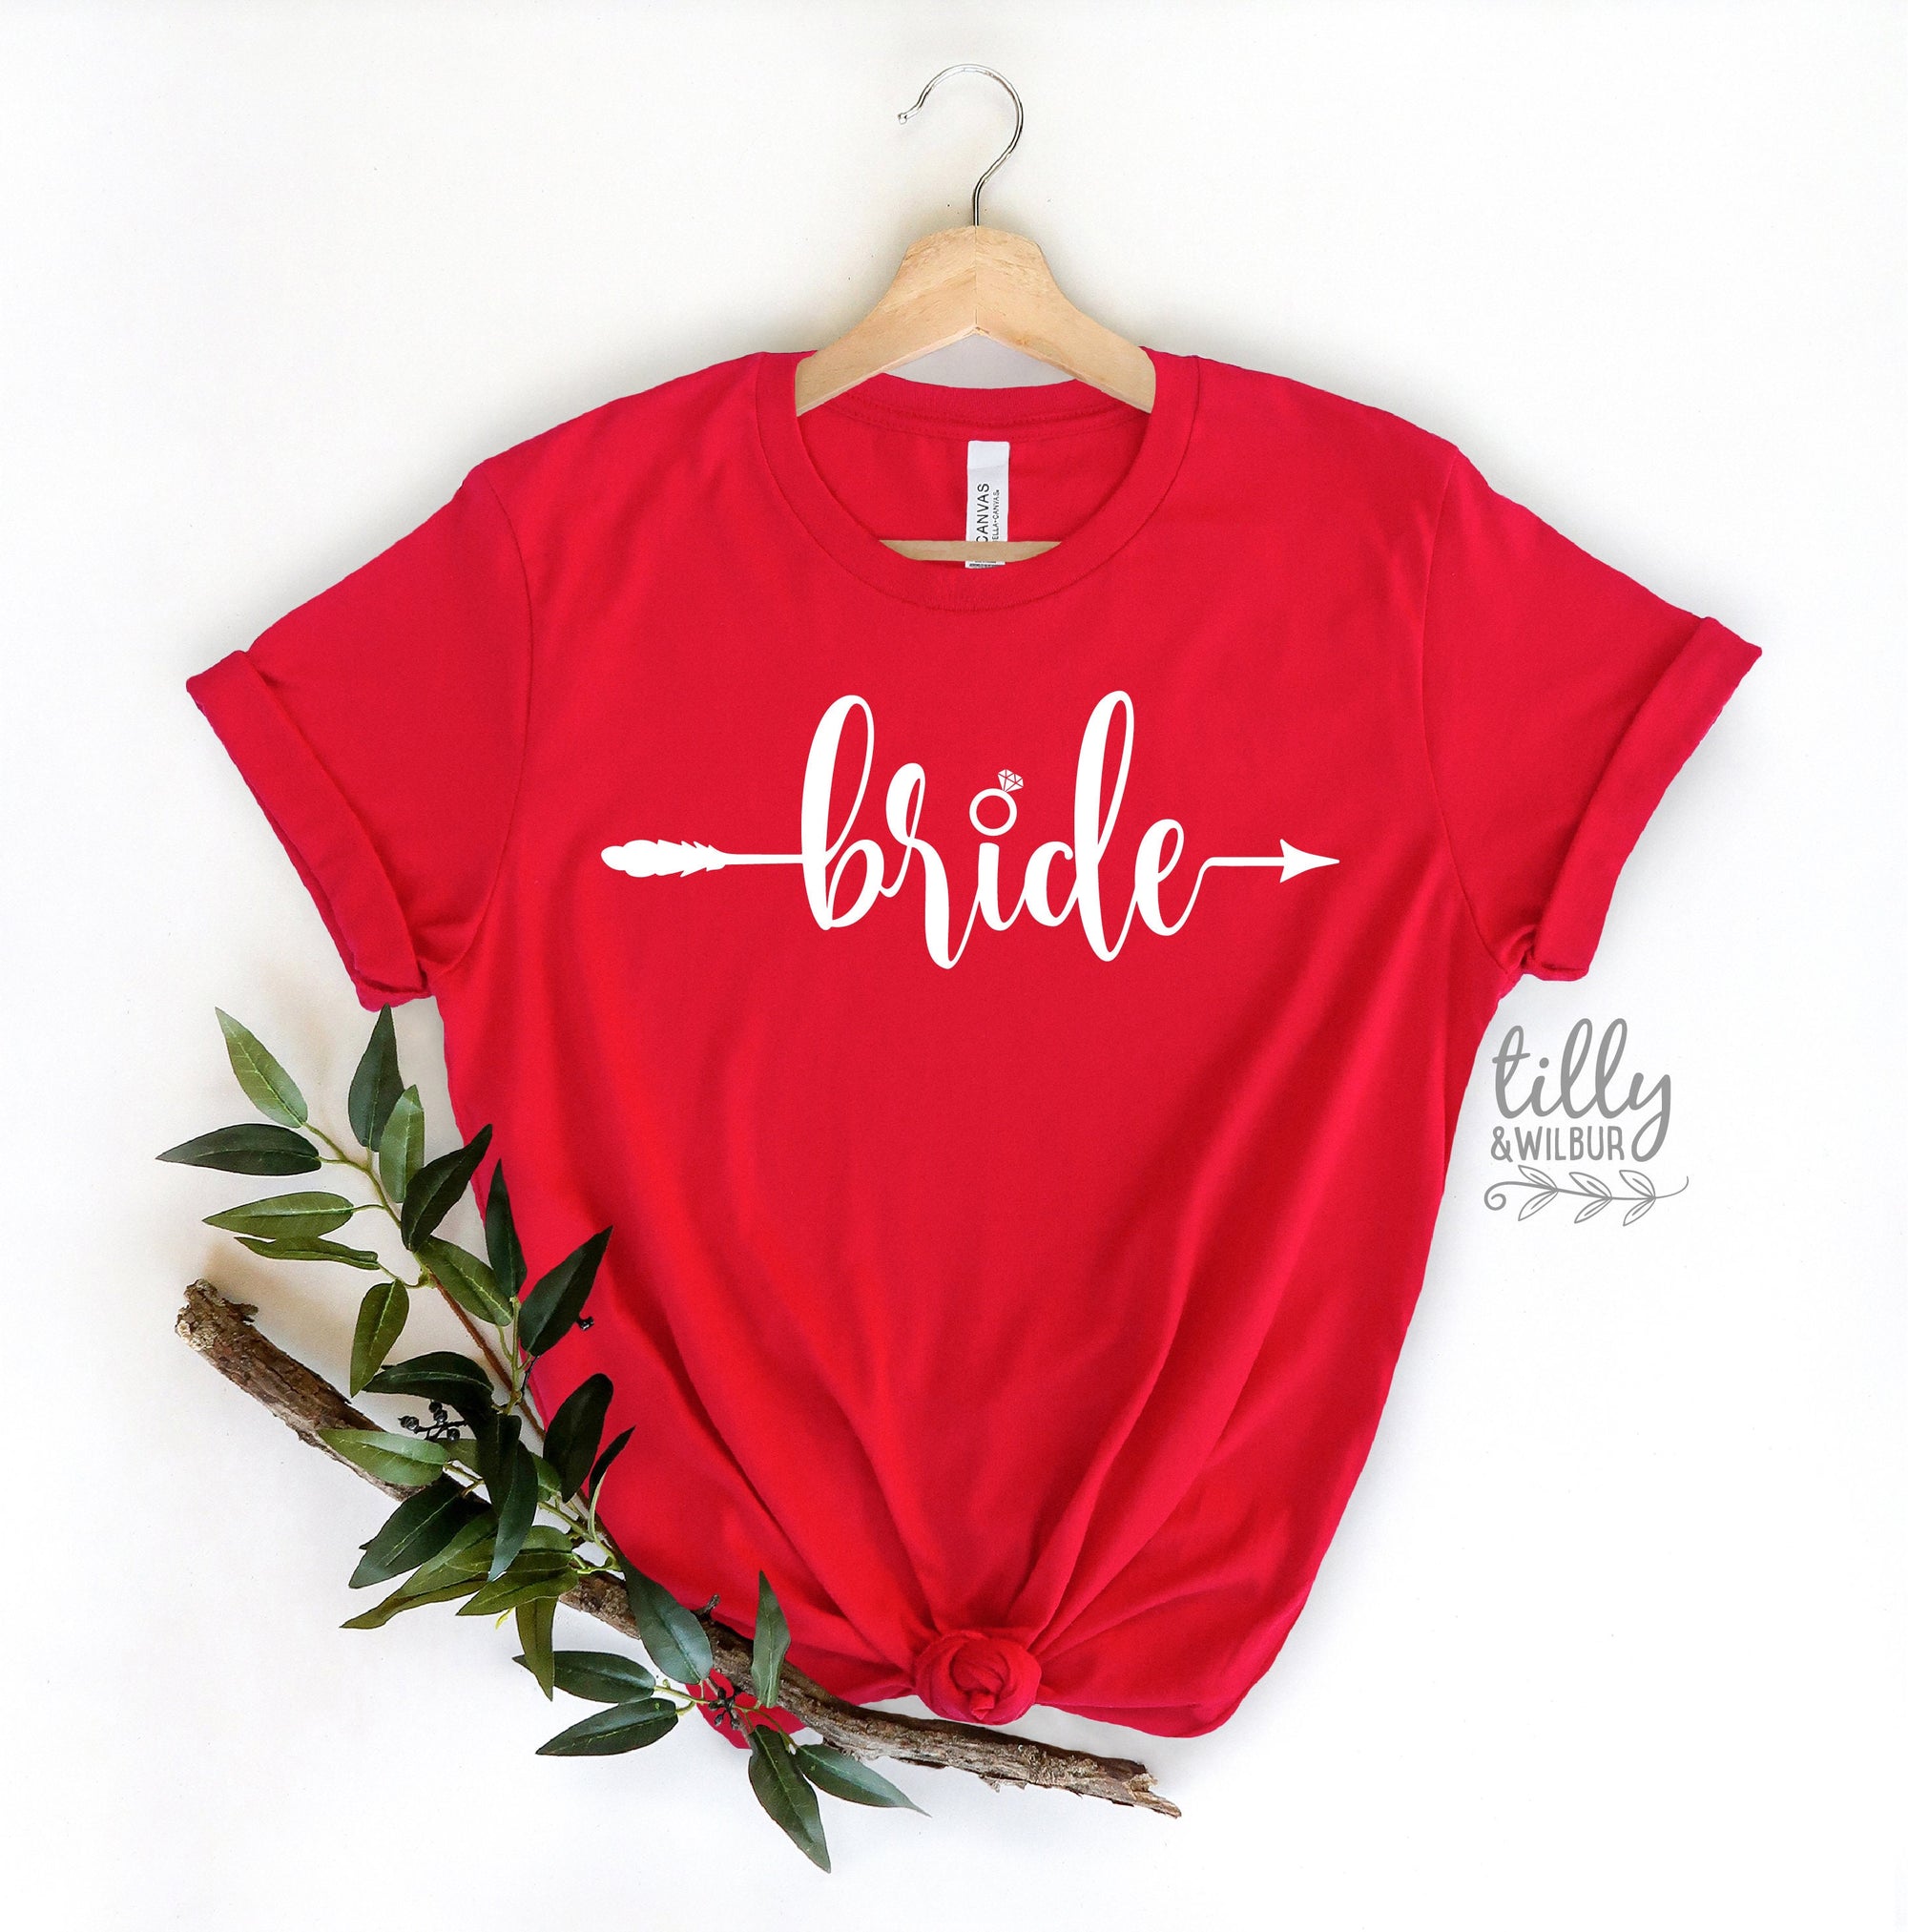 Bride Women&#39;s T-Shirt, Wedding Gift, Wedding Party, Bridal Party, Newlywed, His and Hers, Bride T-Shirt, Hens Night, Bride-To-Be, Bride Tee